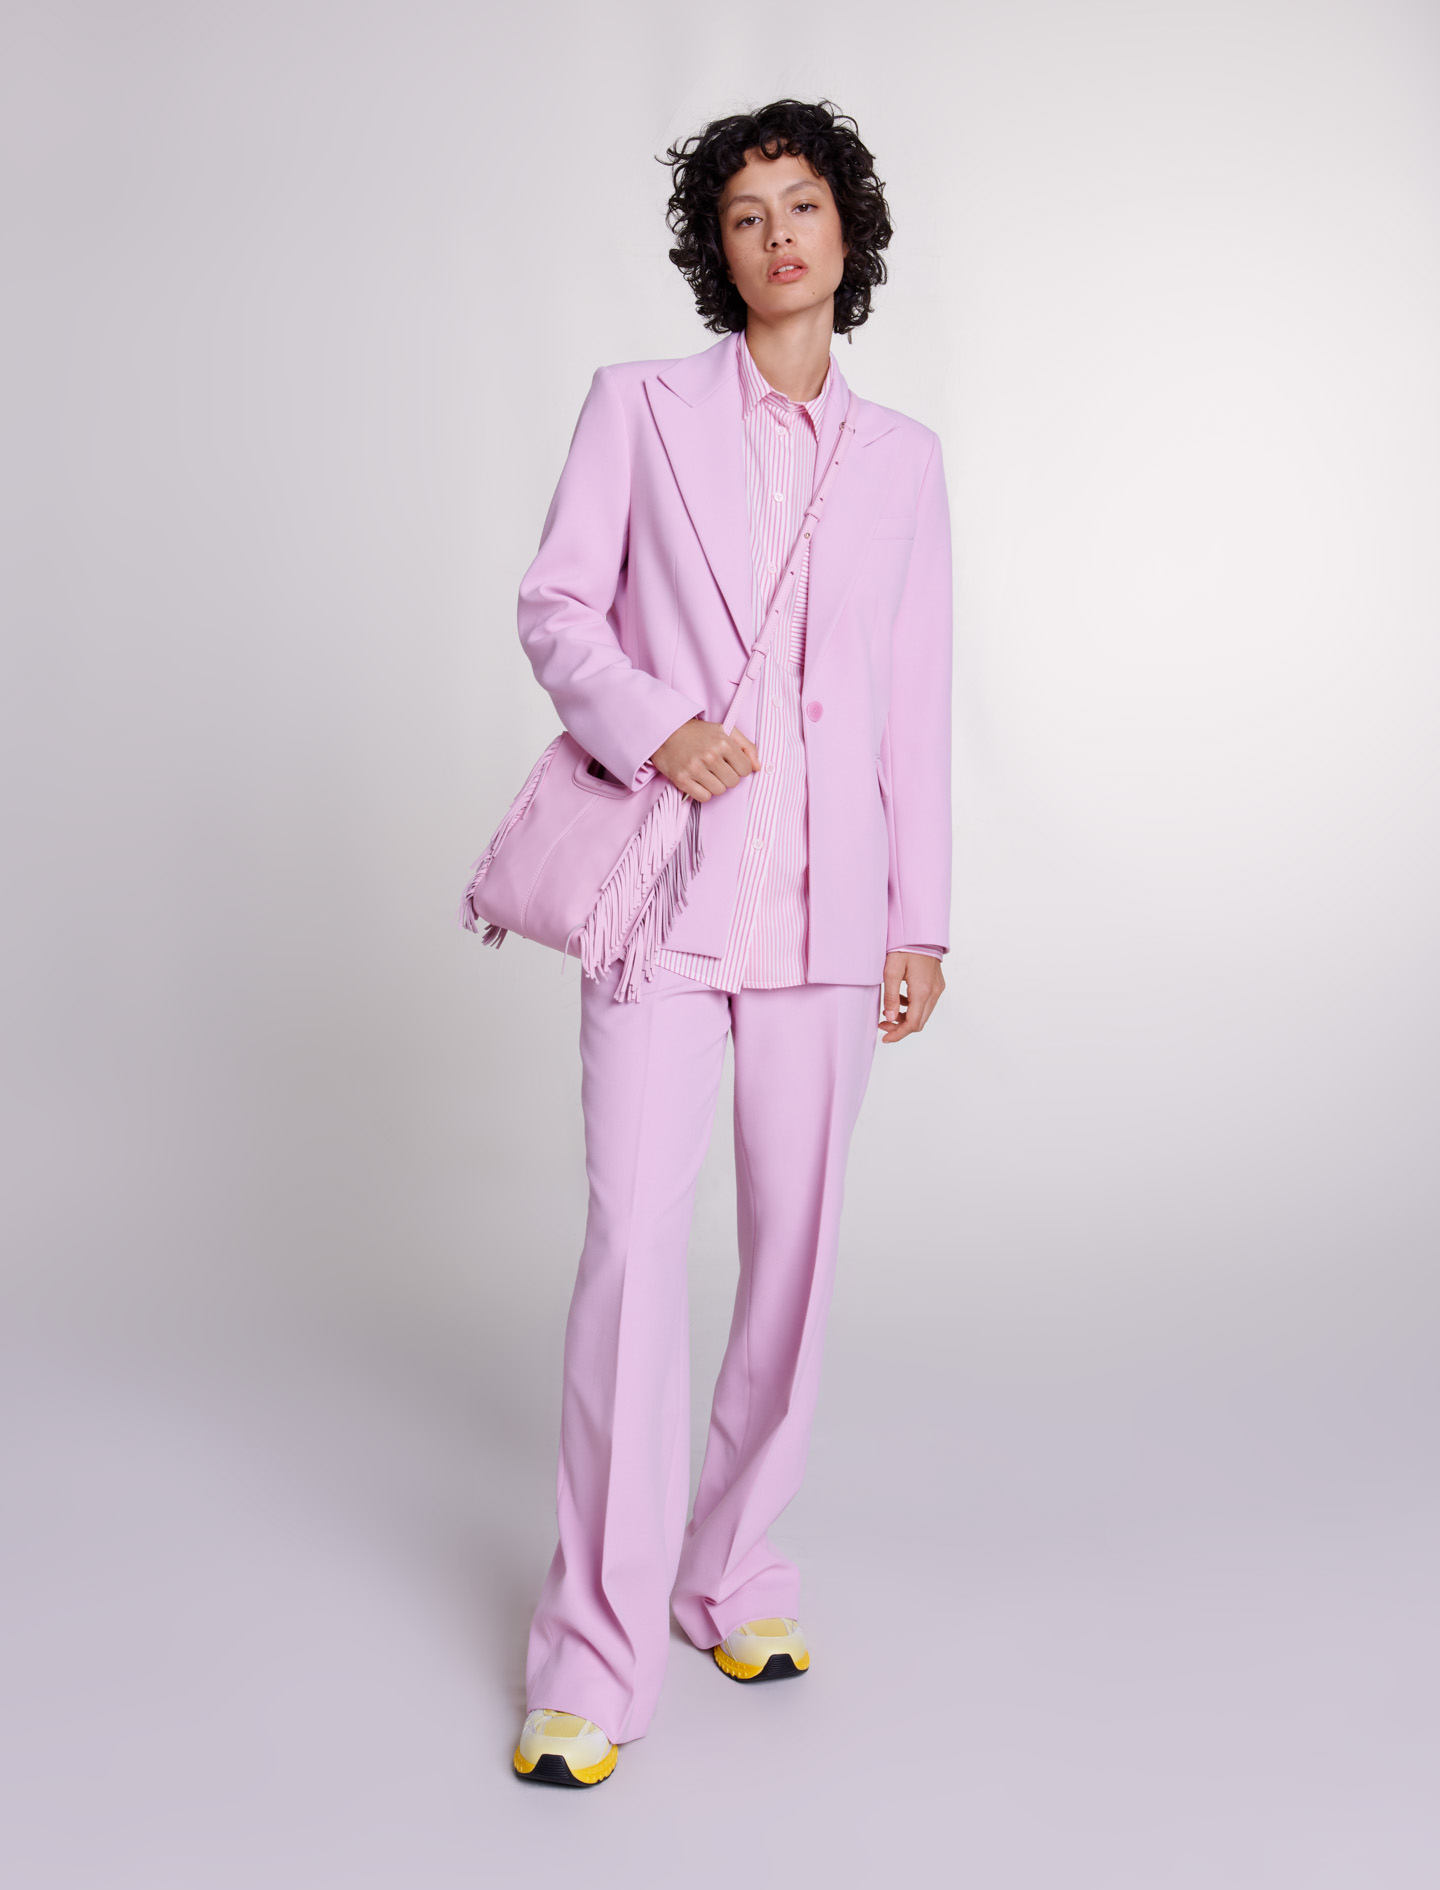 Maje Woman's polyester, Fitted suit jacket for Spring/Summer, in color Pale Pink / Red